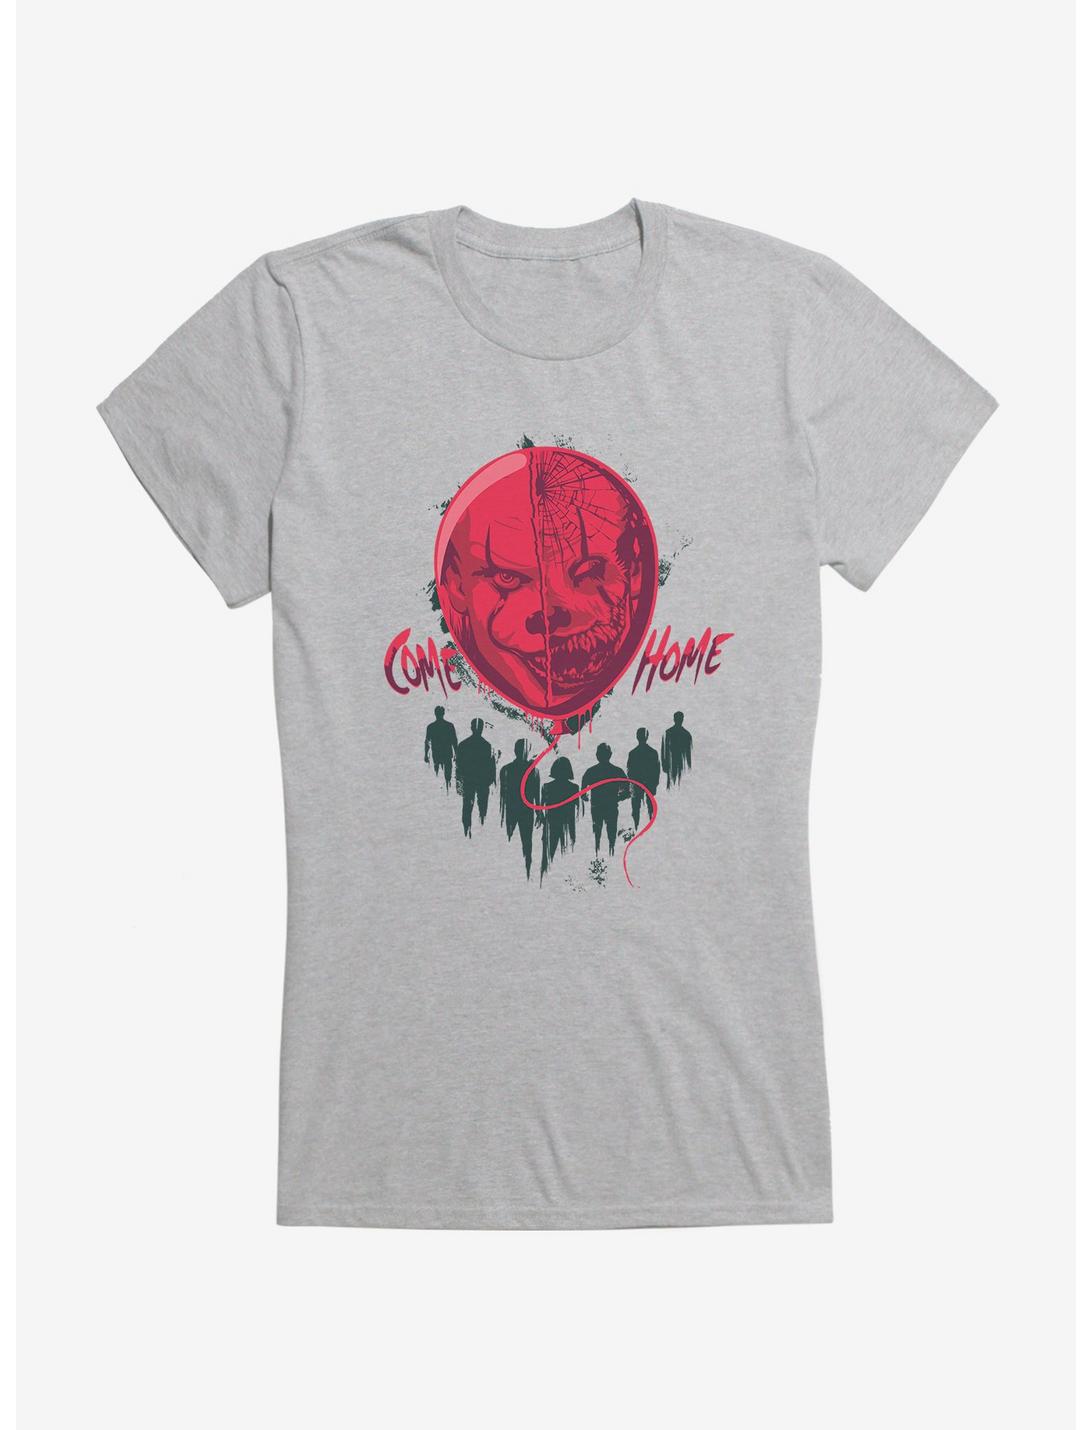 IT Chapter Two Come Home Floating Balloon Girls T-Shirt, HEATHER, hi-res